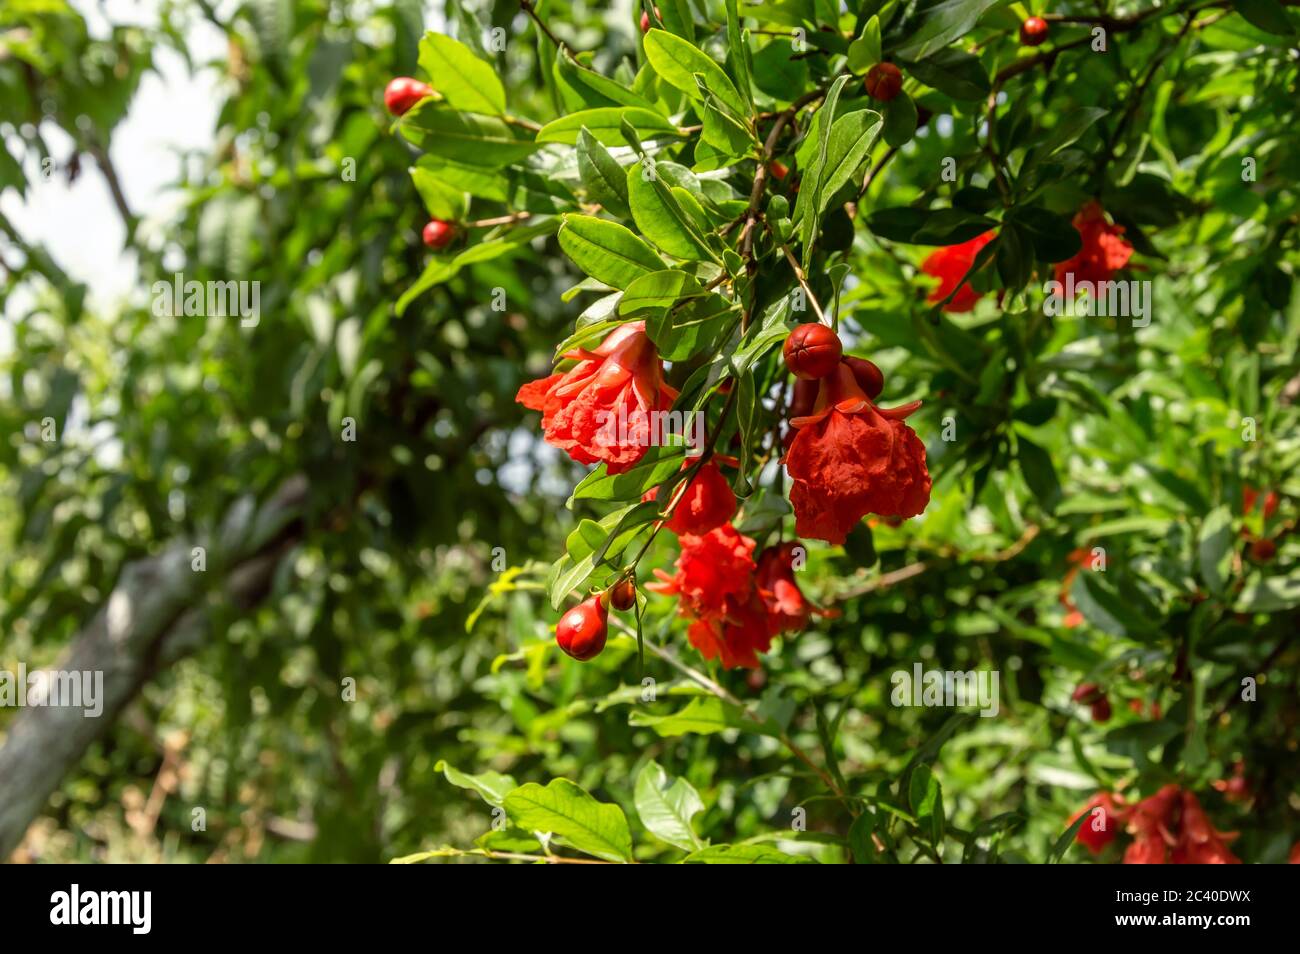 Pomegranate tree branch with blooming red flowers and small unripe fruit. Punica Granatum cultivation. Organic gardening and agriculture Stock Photo